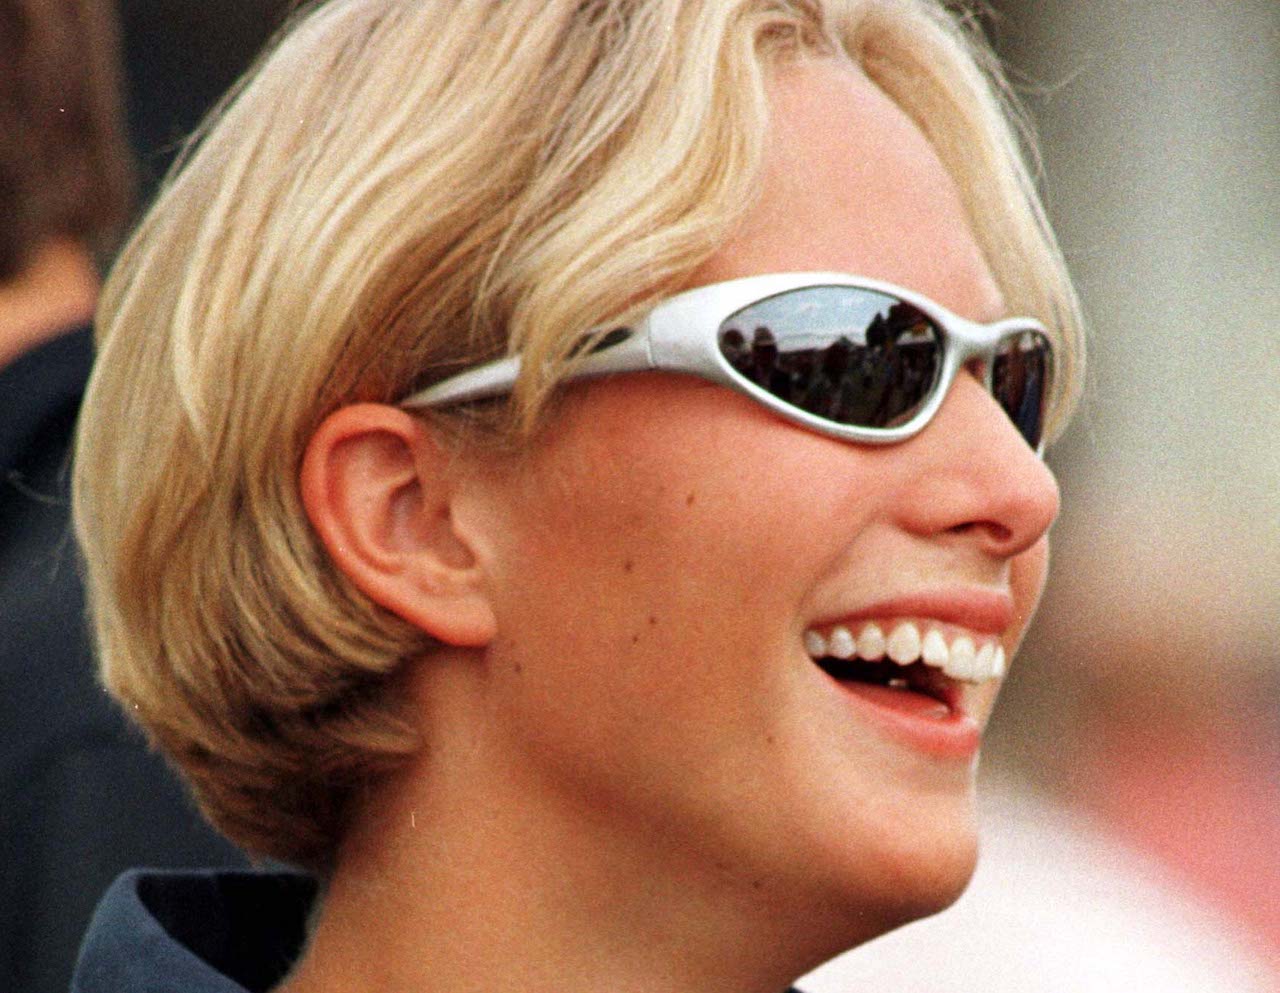 A glimpse of Zara Tindall's tongue piercing.